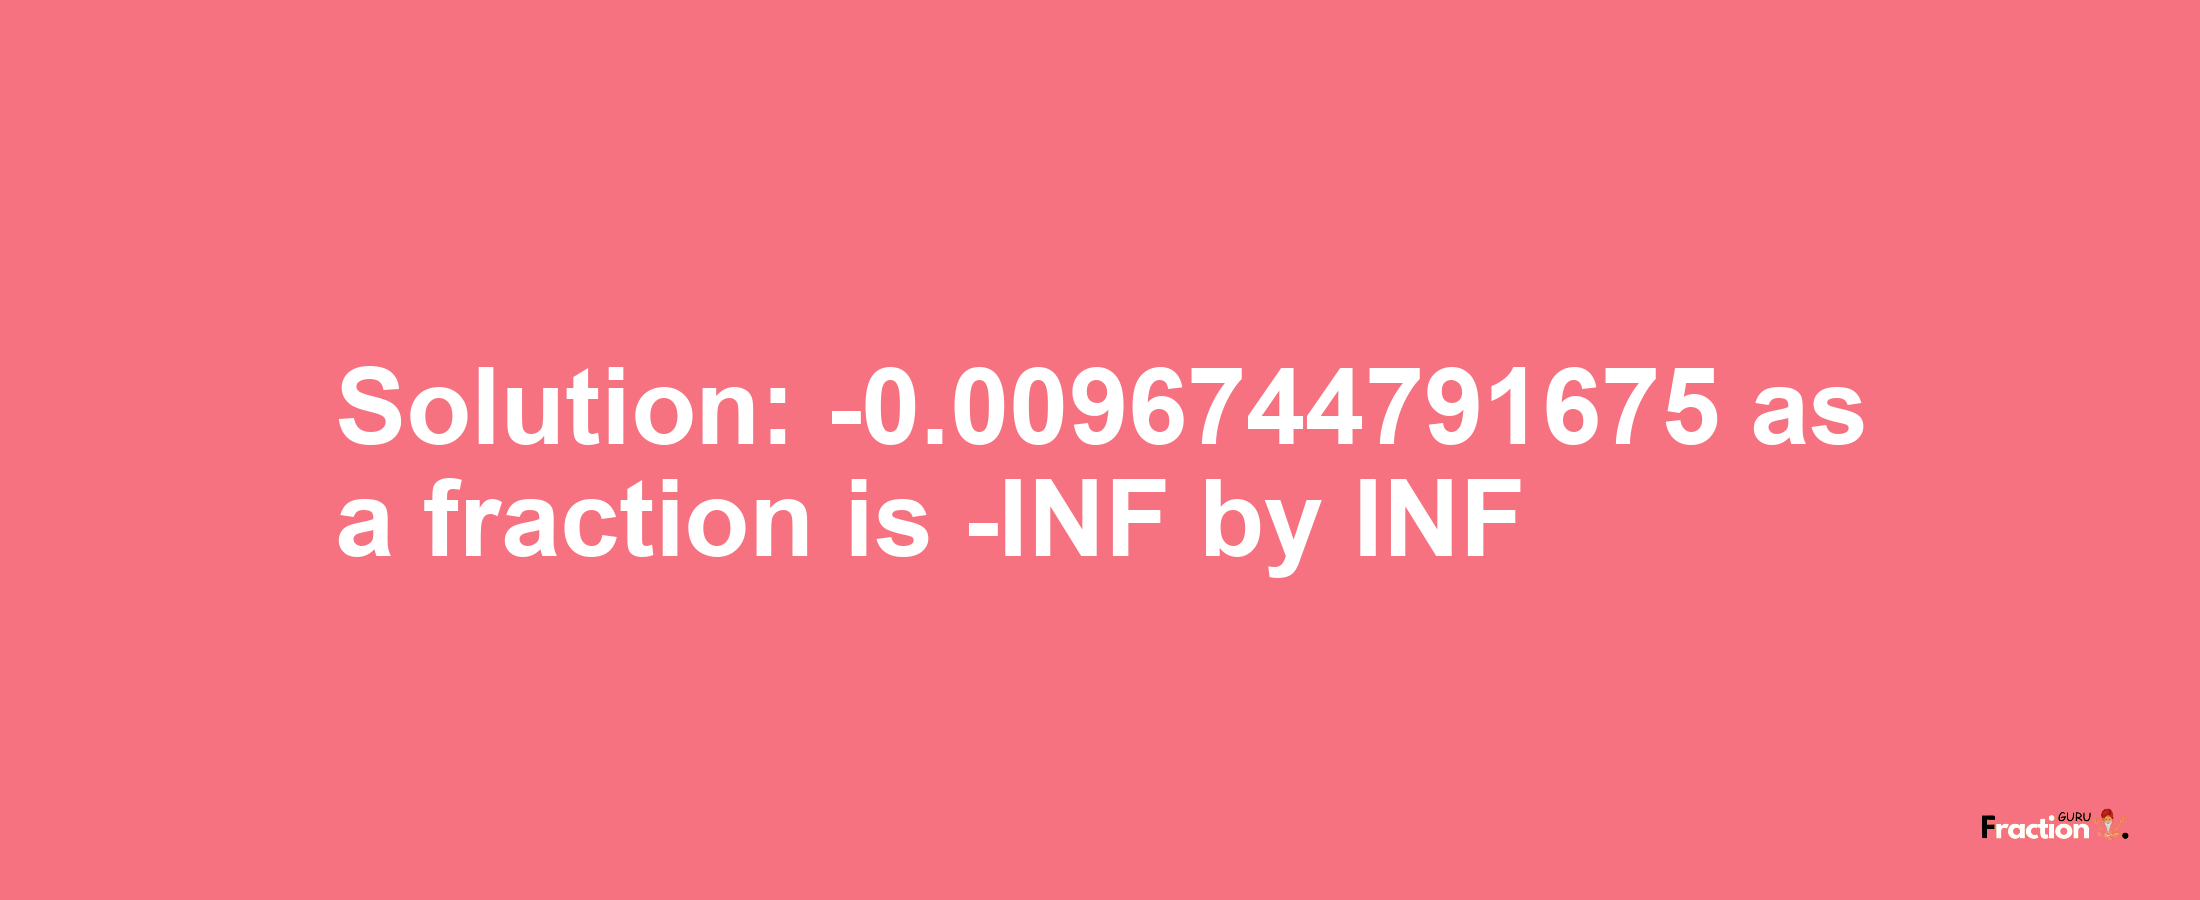 Solution:-0.0096744791675 as a fraction is -INF/INF